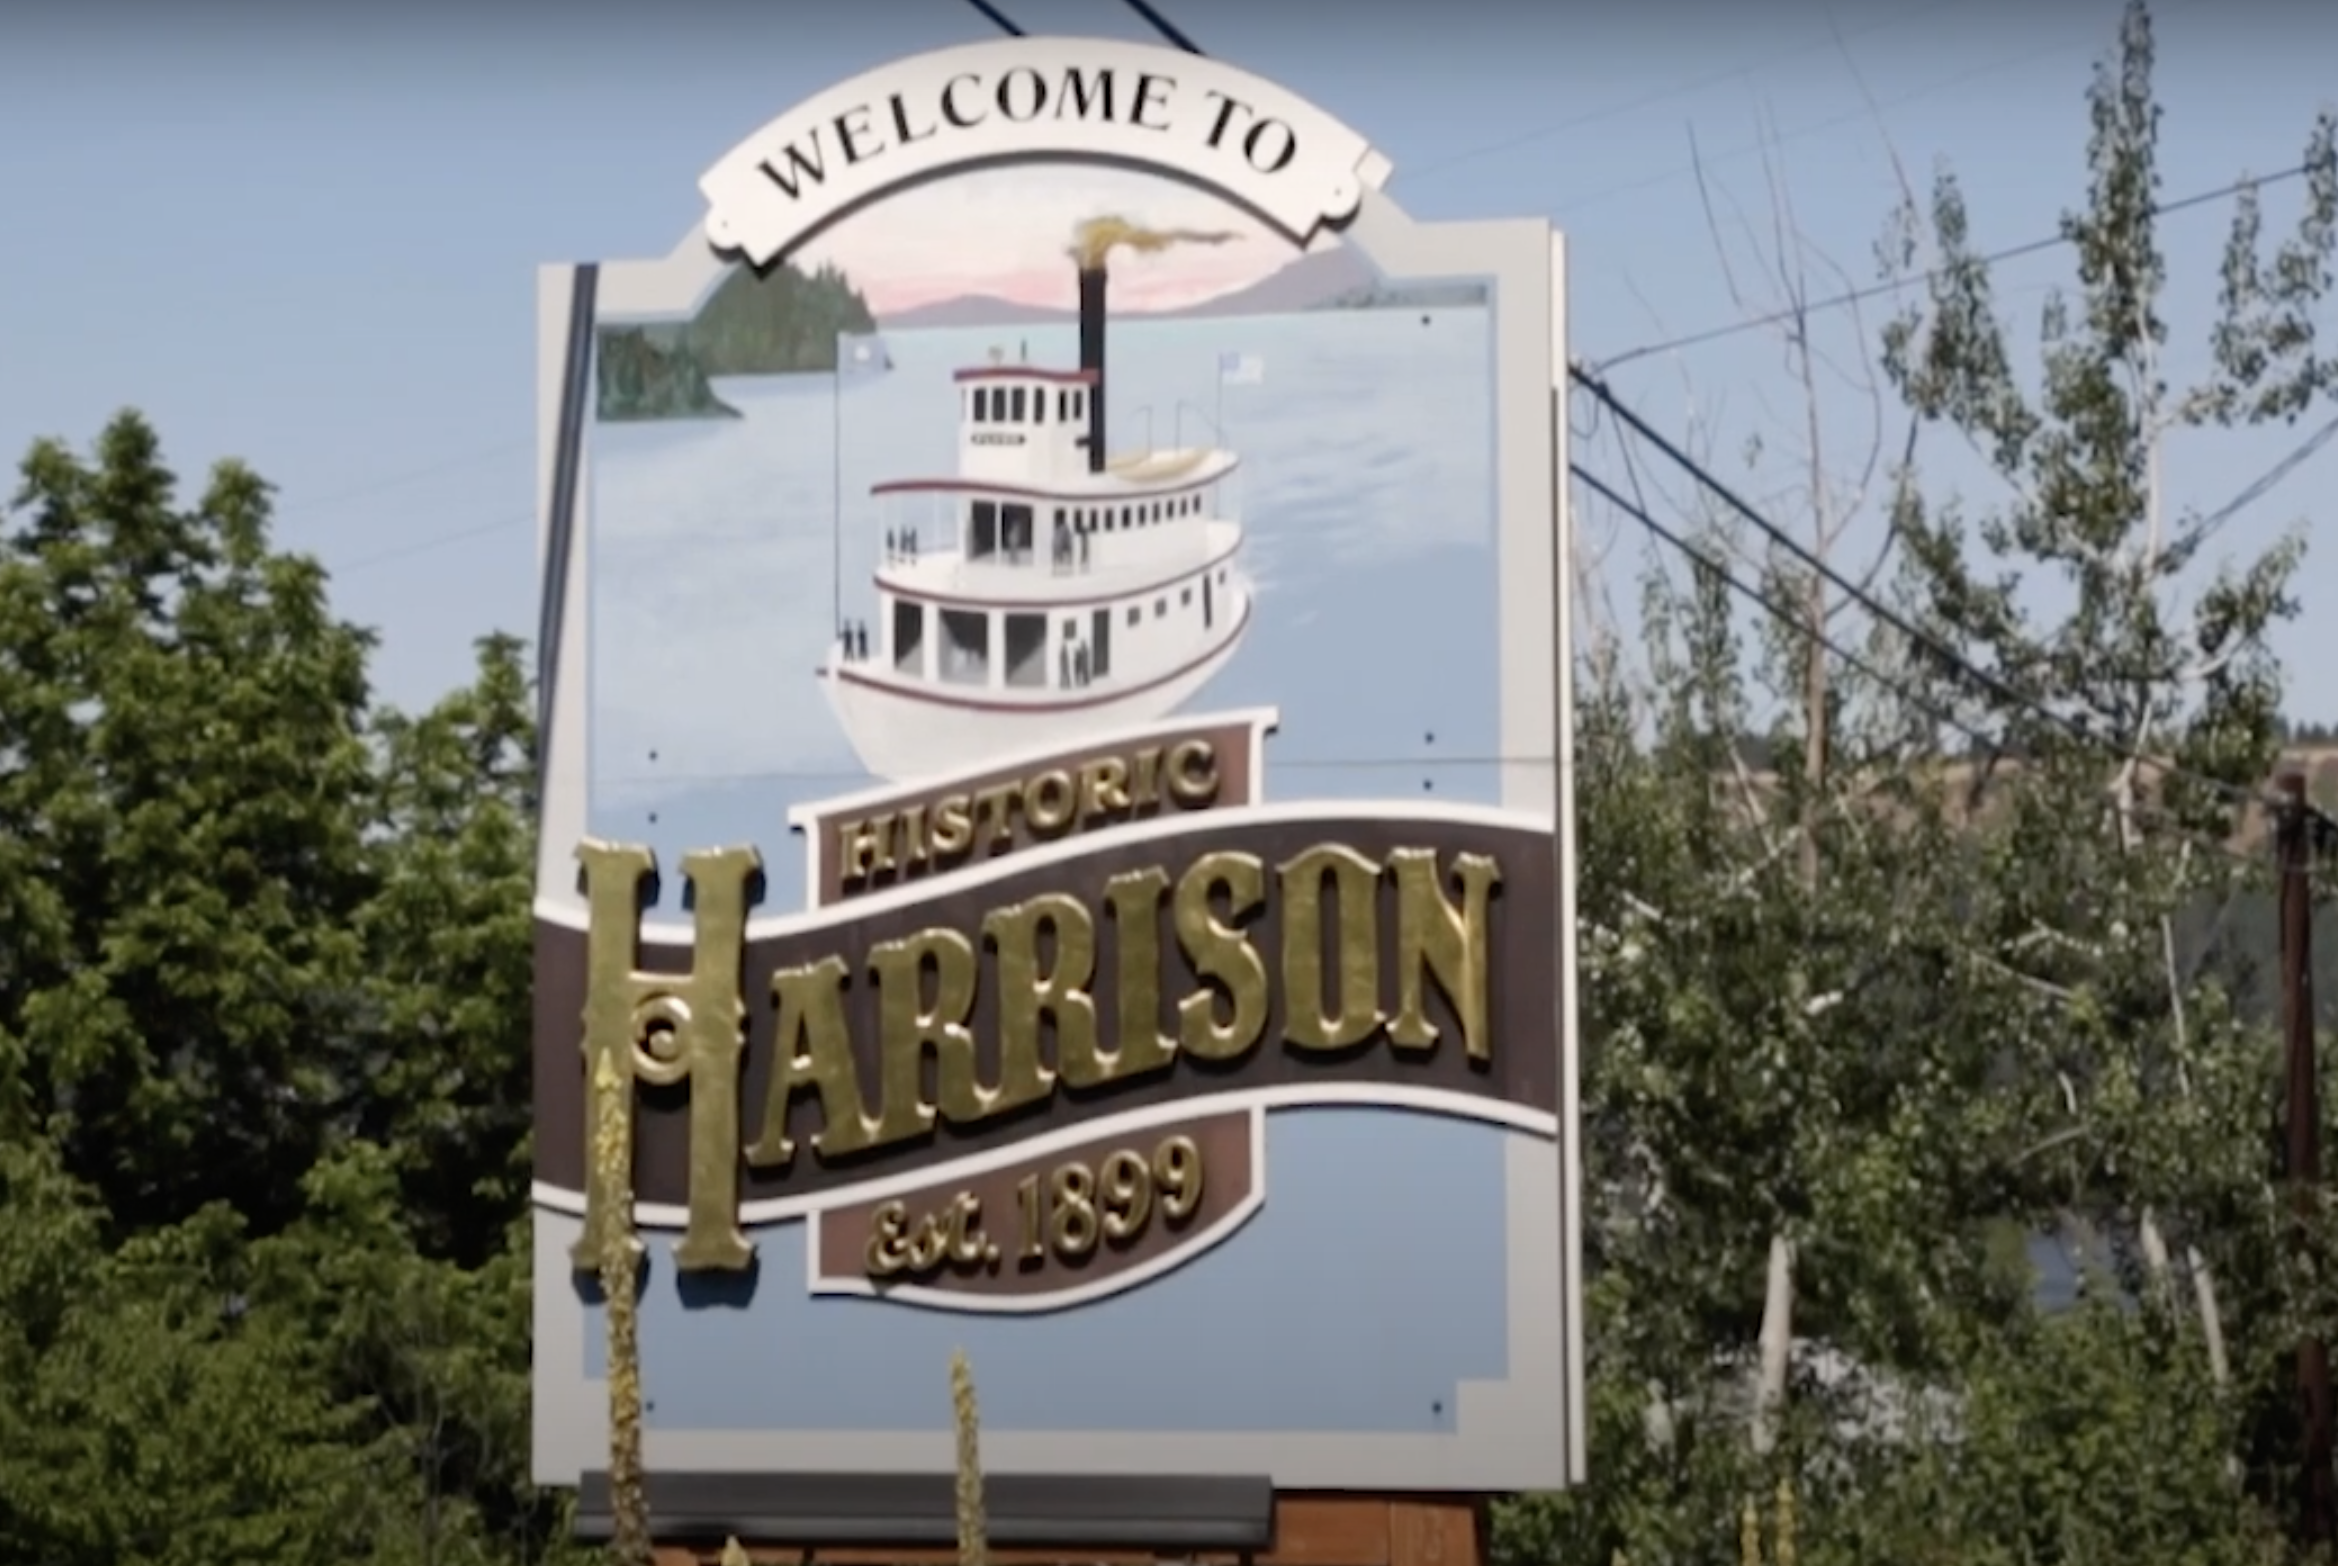 Welcome sign for Harrison, Idaho.